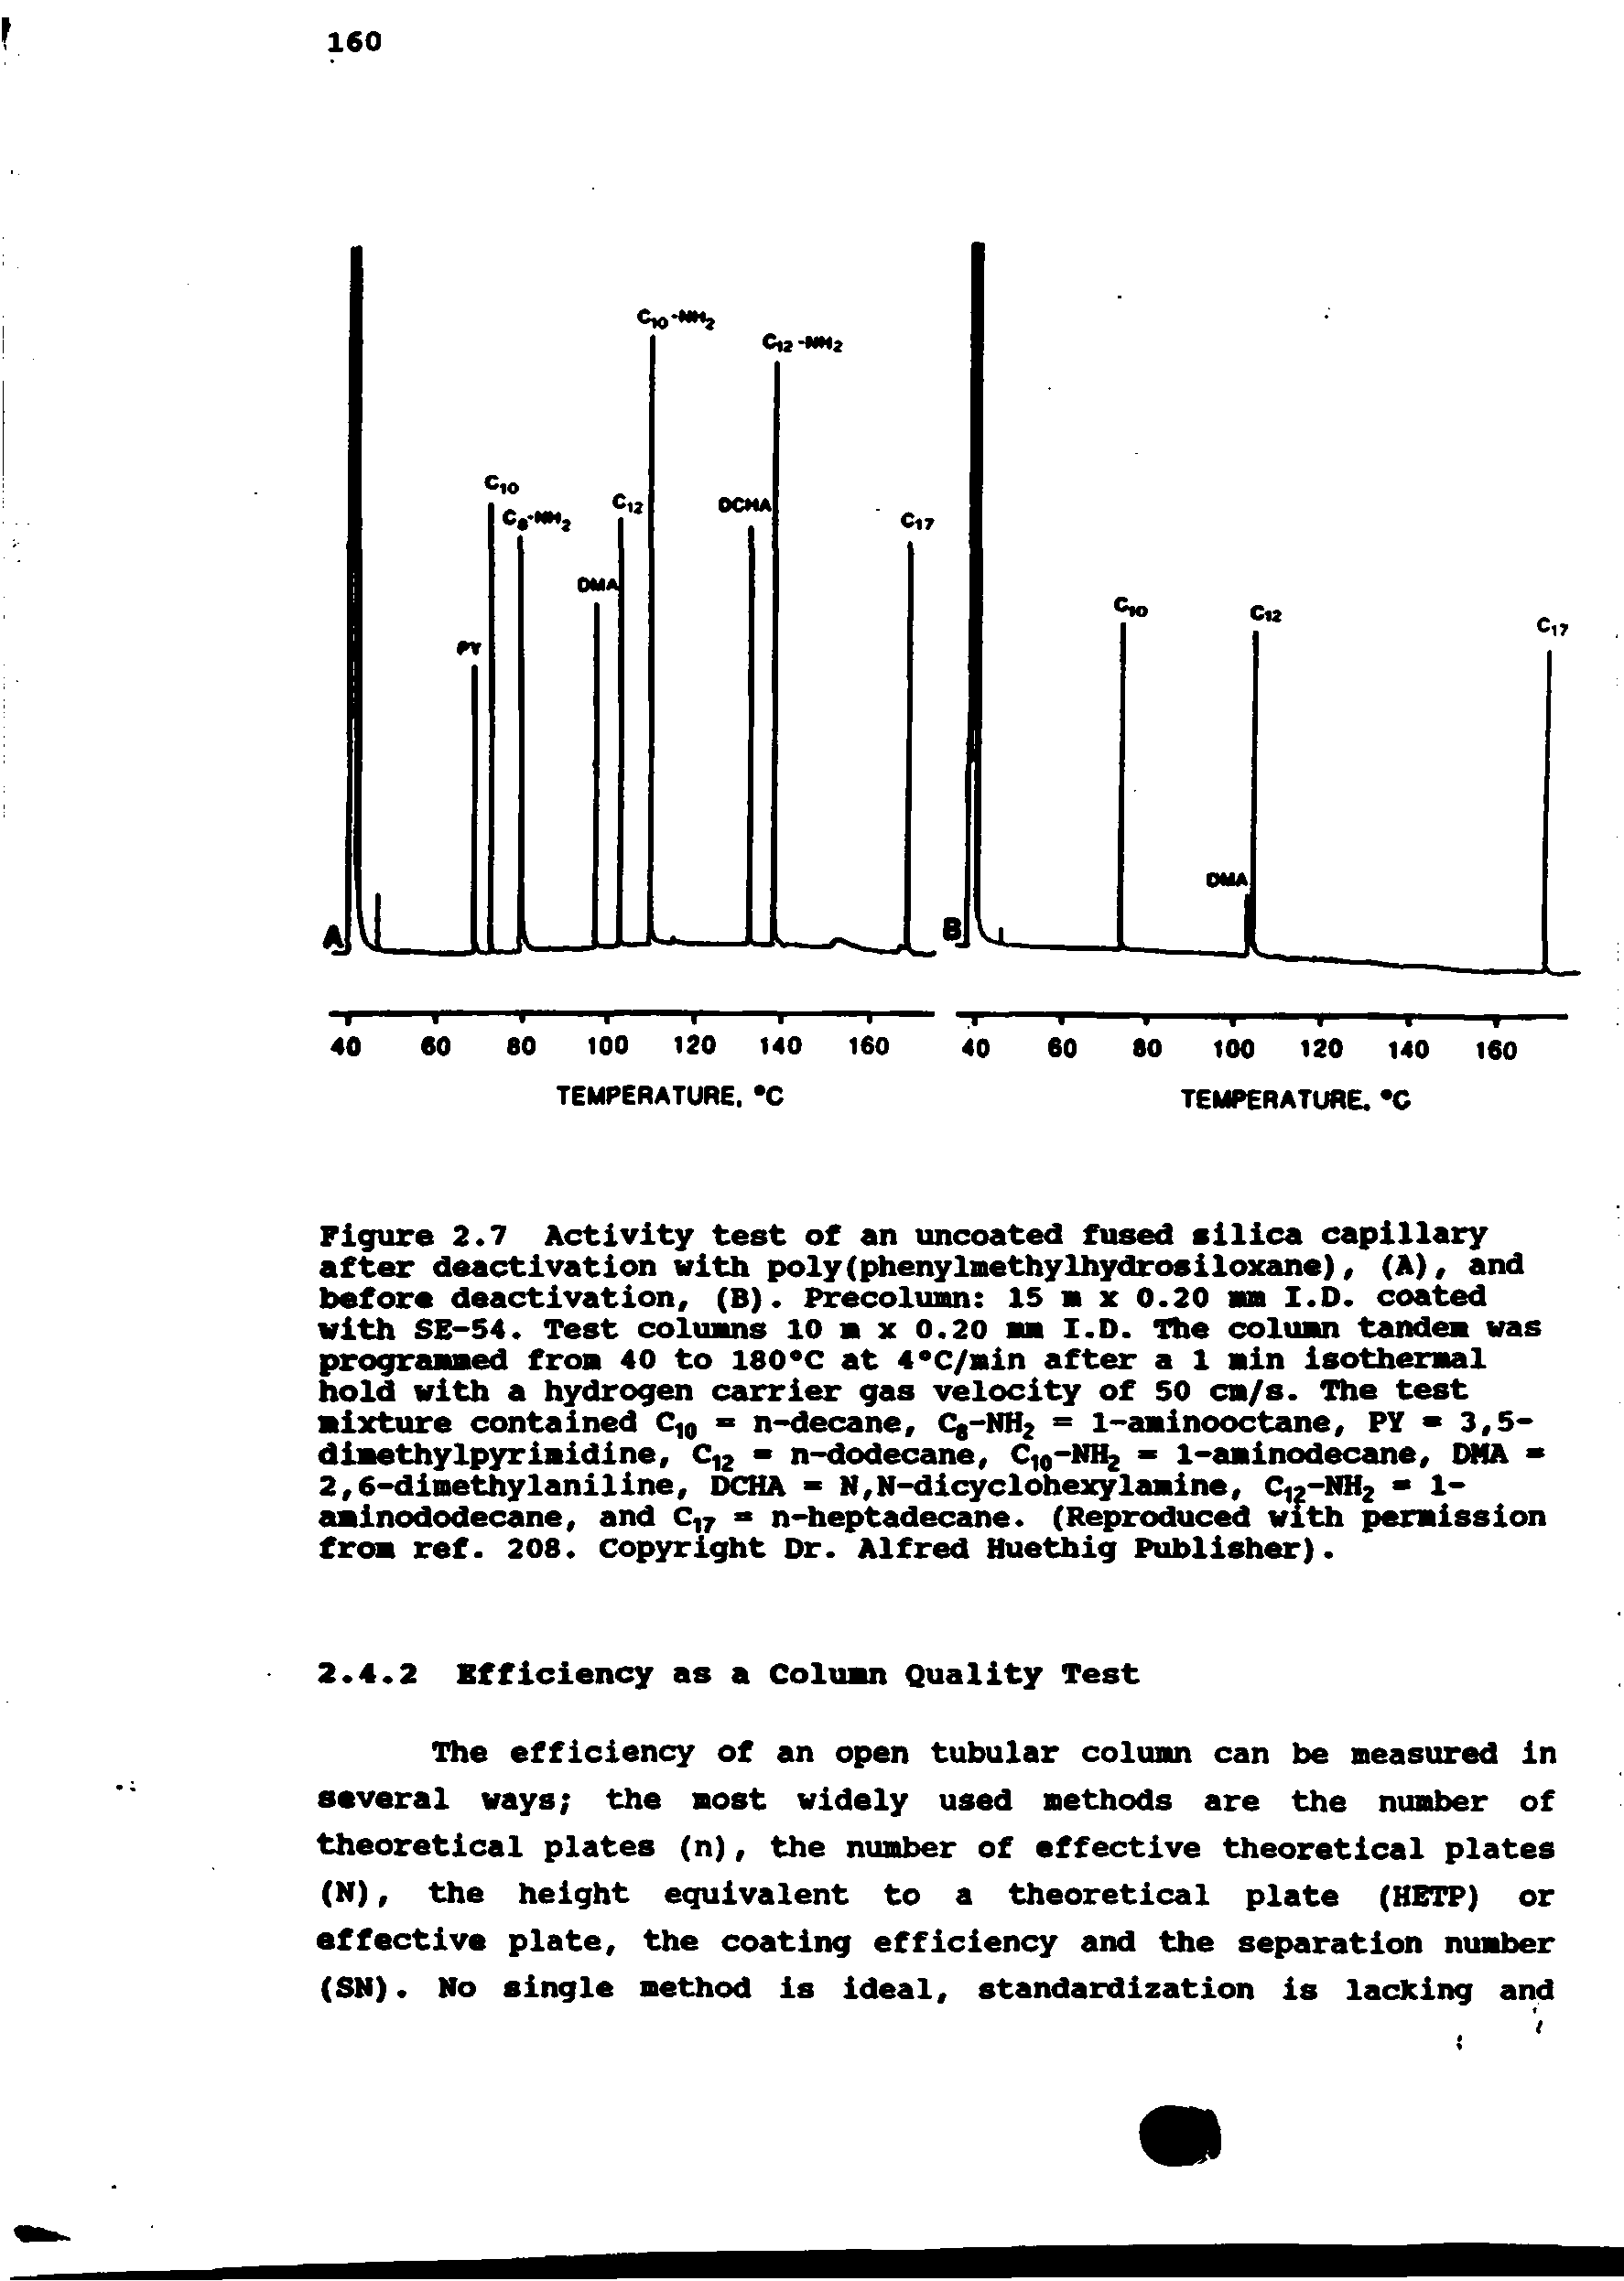 Figure 2.7 Activity test of an uncoated fused silica capillary after deactivation with poly(phenyliaethylhydrosiloxane), (A), and before deactivation, (B). Precolunn 15 x 0.20 m I.D. coated with SE-54. Test columns 10 a x 0.20 I.D. The column tandem was programmed from 40 to I80 c at a C/min after a 1 min isothermal hold with a hydrogen carrier gas velocity of 50 cm/s. The test mixture contained 10 n-decane, Cg-NH = l-aminooctane, PY 3,5-dimethylpyrimidine, C 2 n-dodecane, - 1-amlnodecane, DMA ...